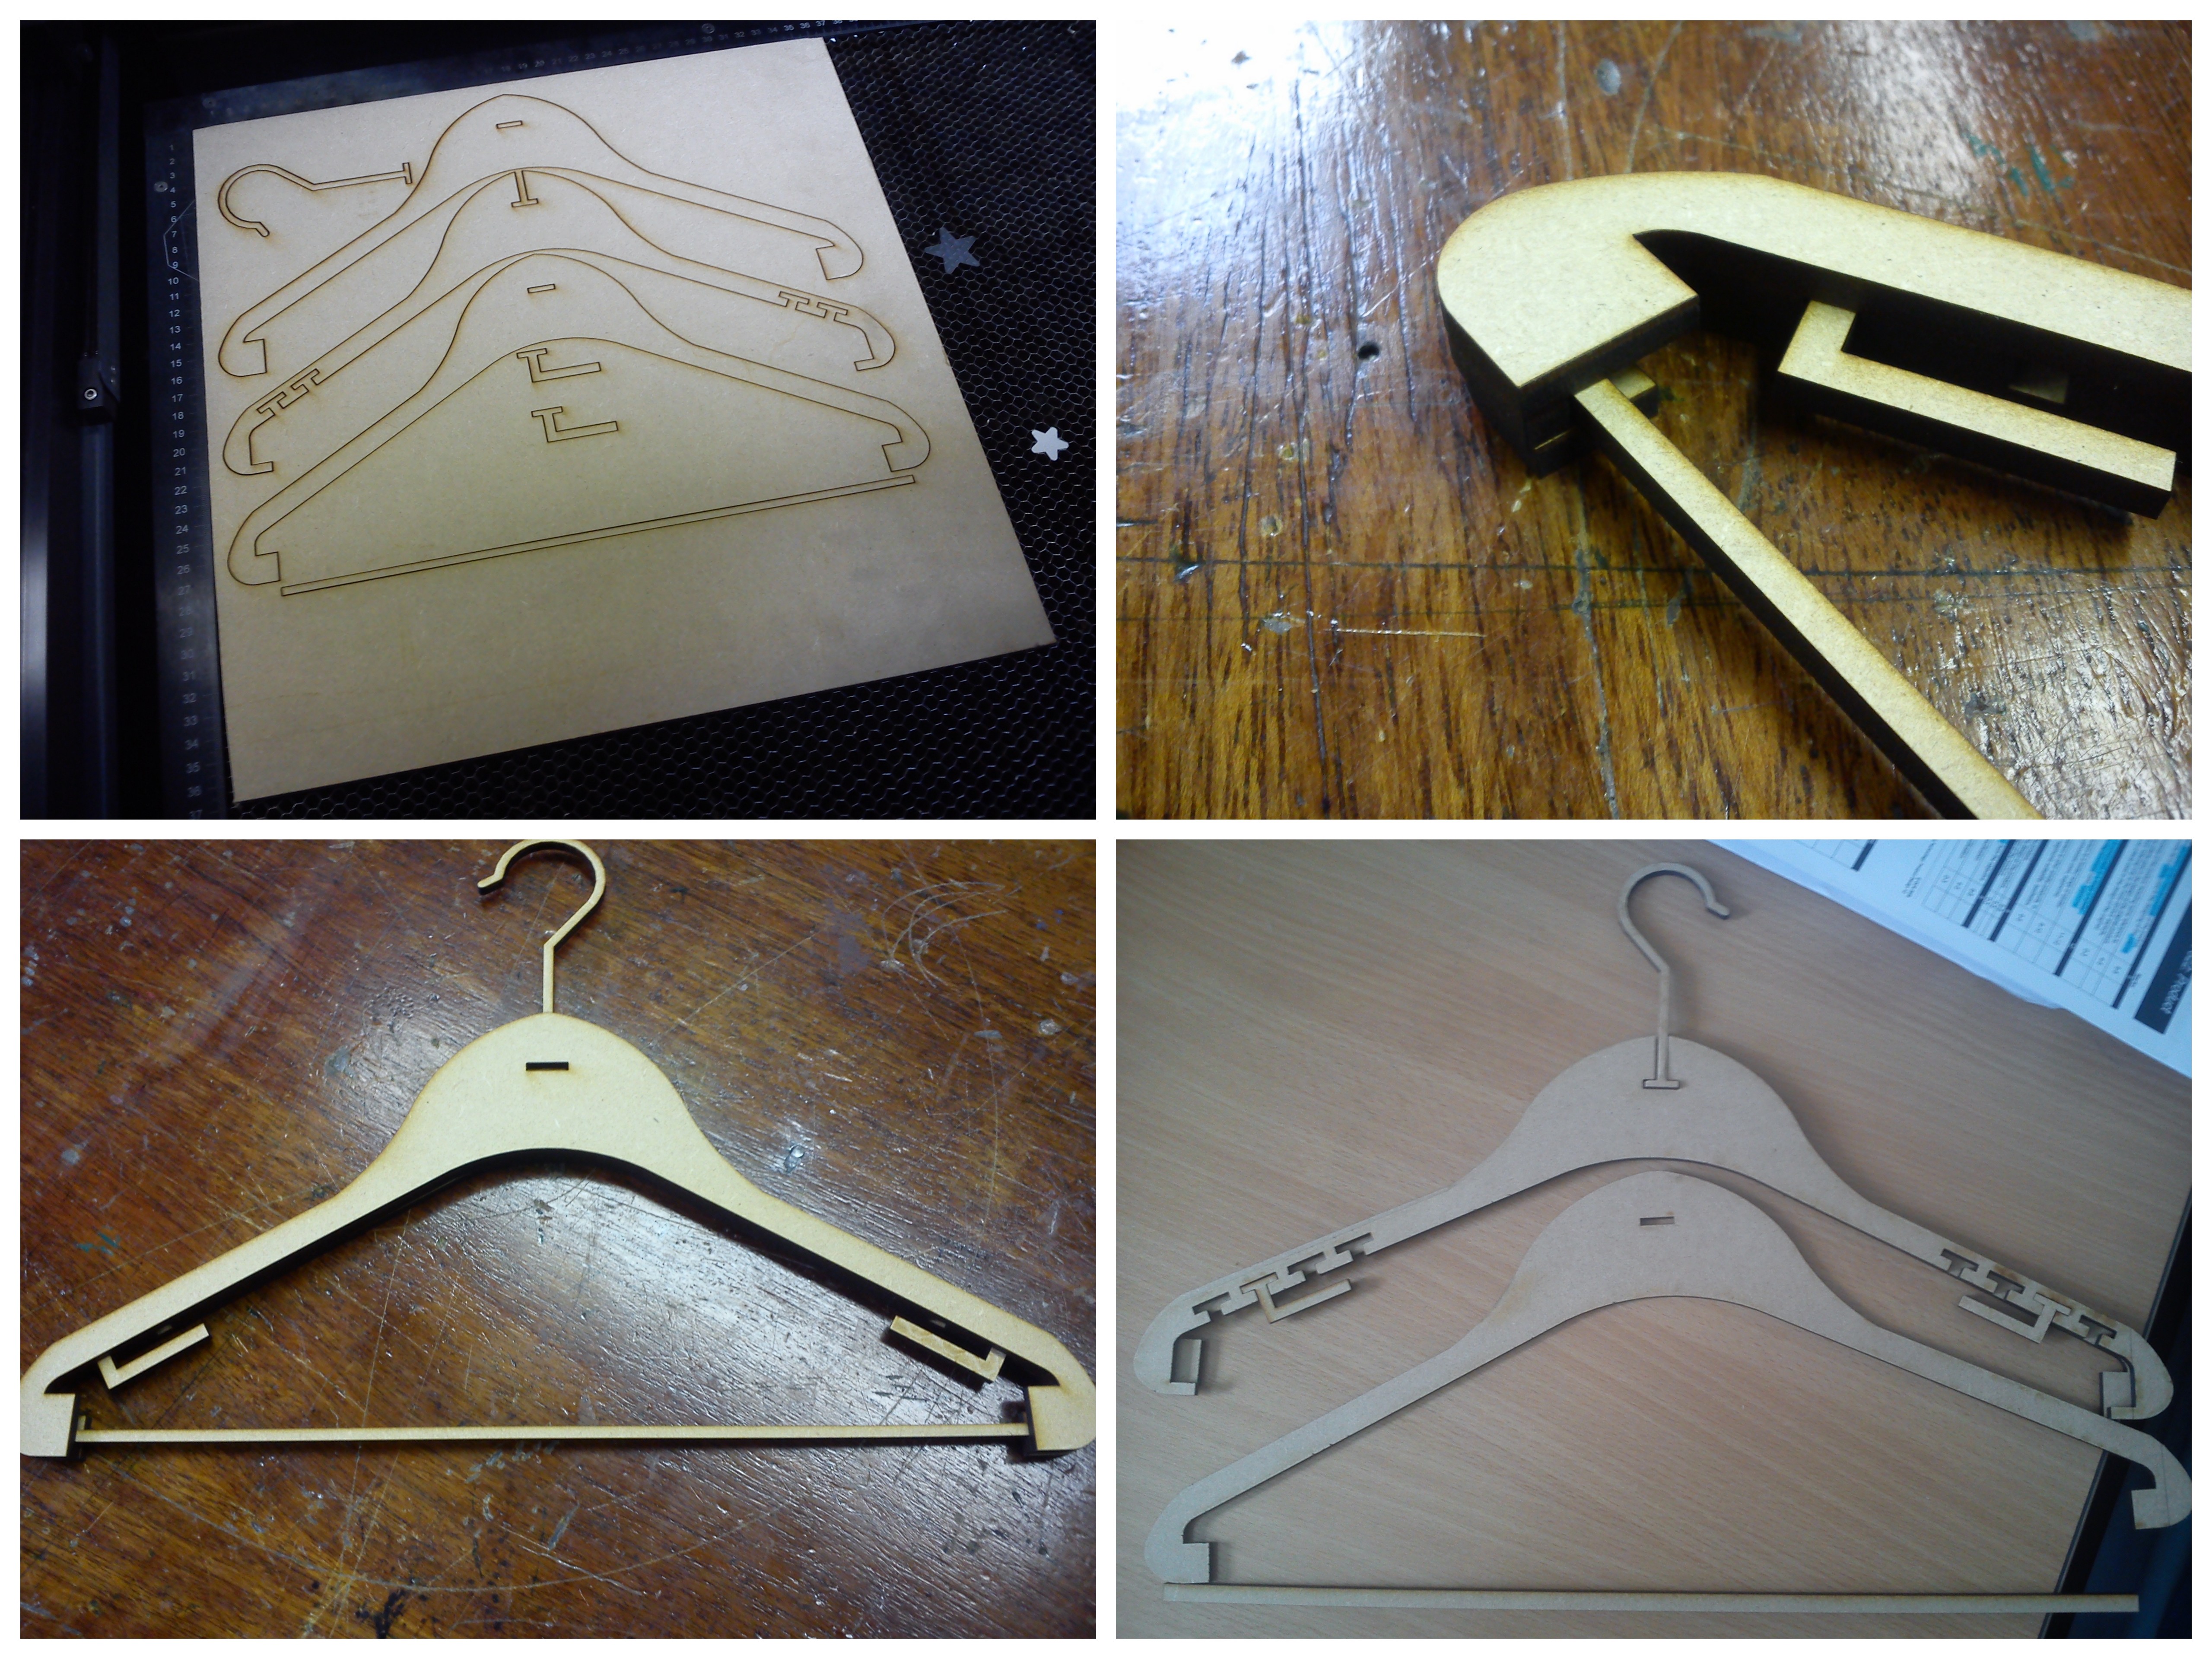 Pictures of my AS Product Design Configurable Coat Hanger